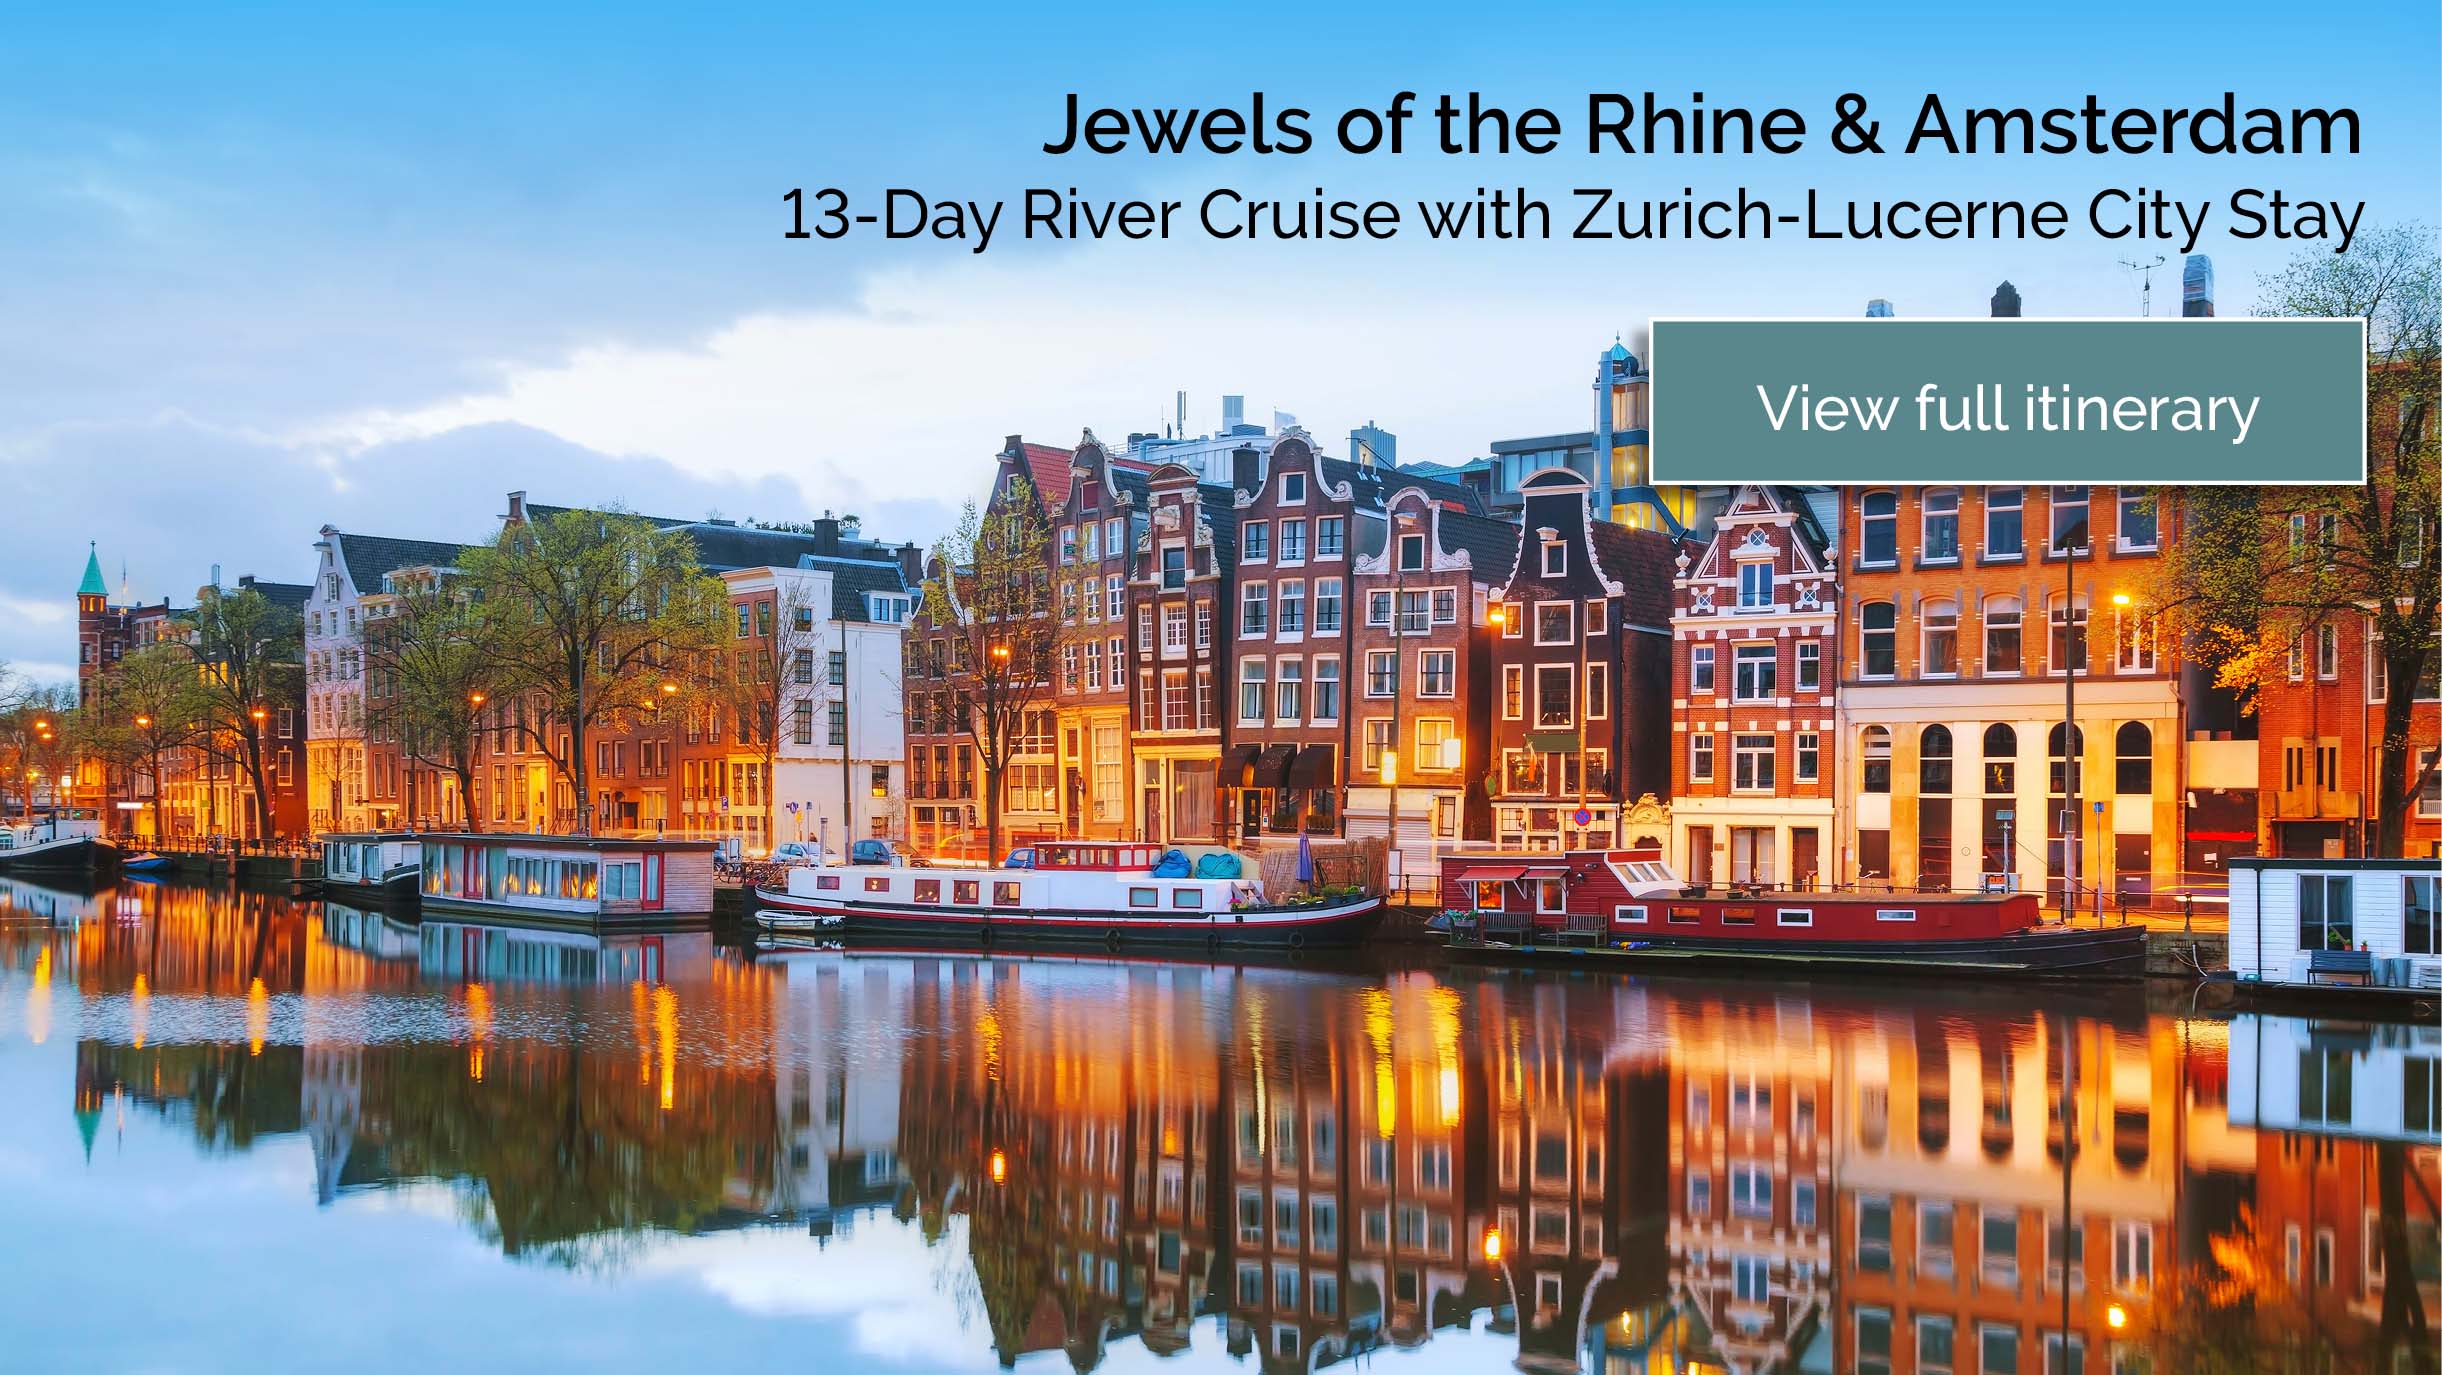 click to view the Jewels of the Rhine & Amsterdam 13-Day river cruise with Zurich-Lucerne City Stay itinerary